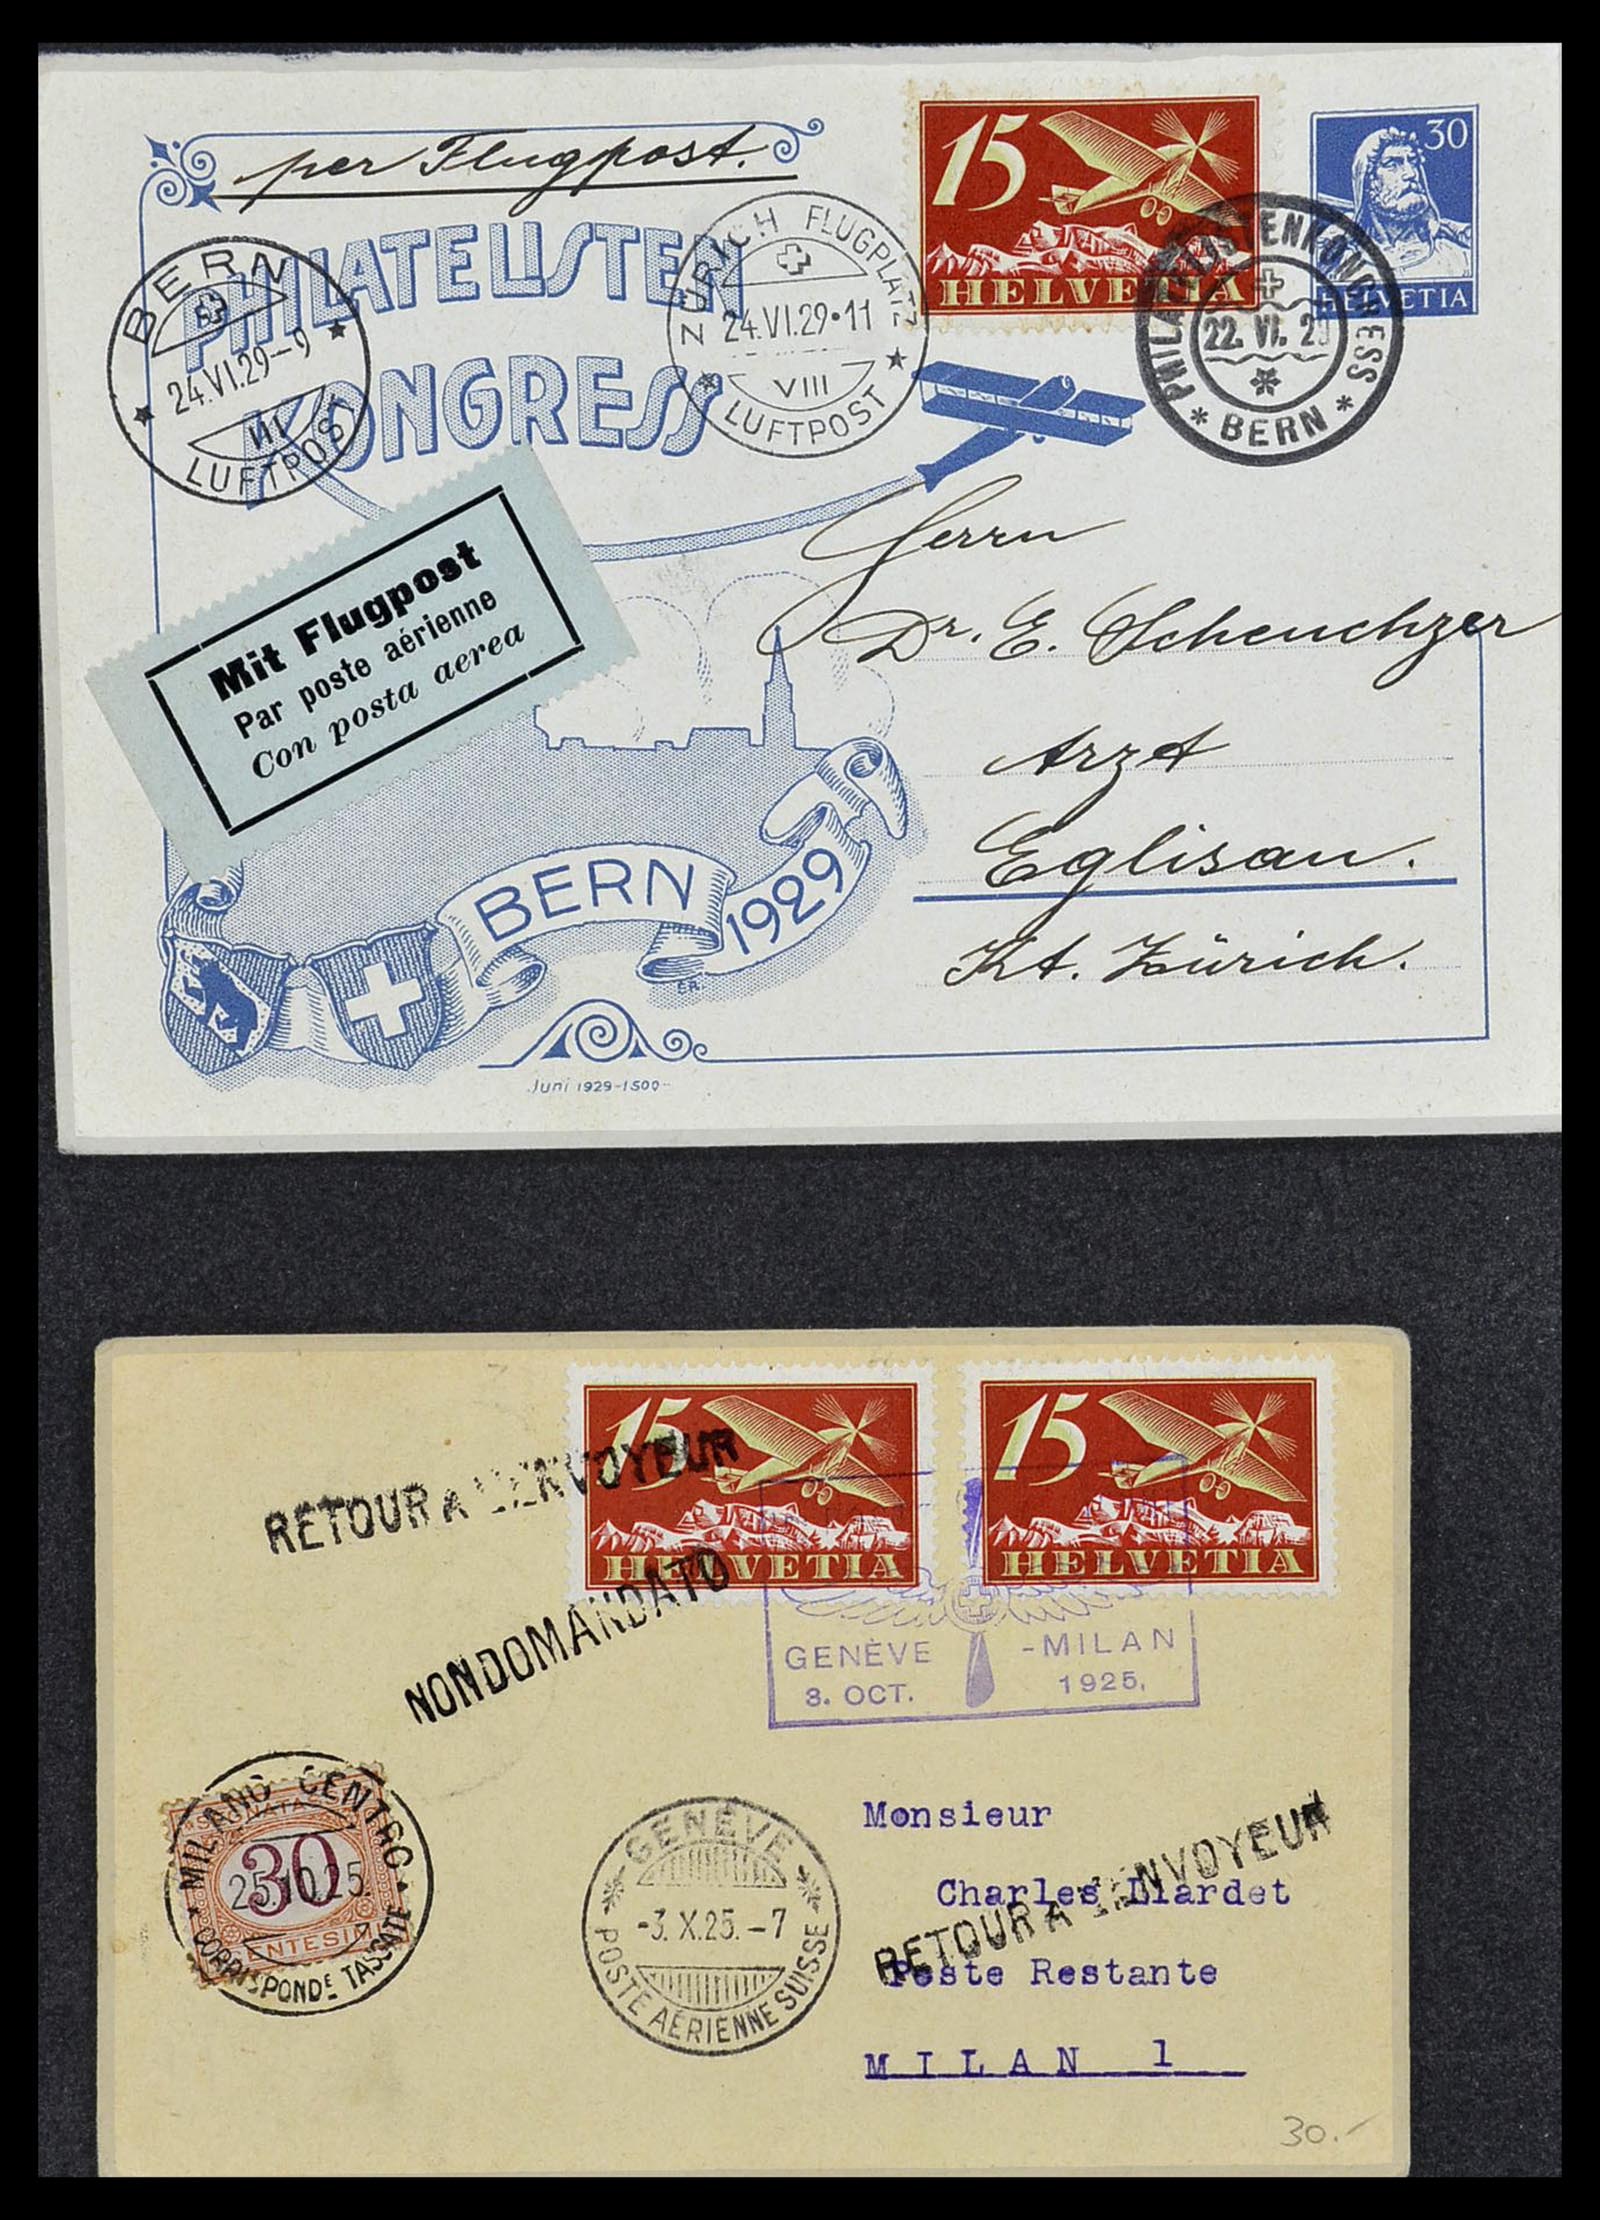 34141 021 - Stamp collection 34141 Switzerland airmail covers 1920-1960.